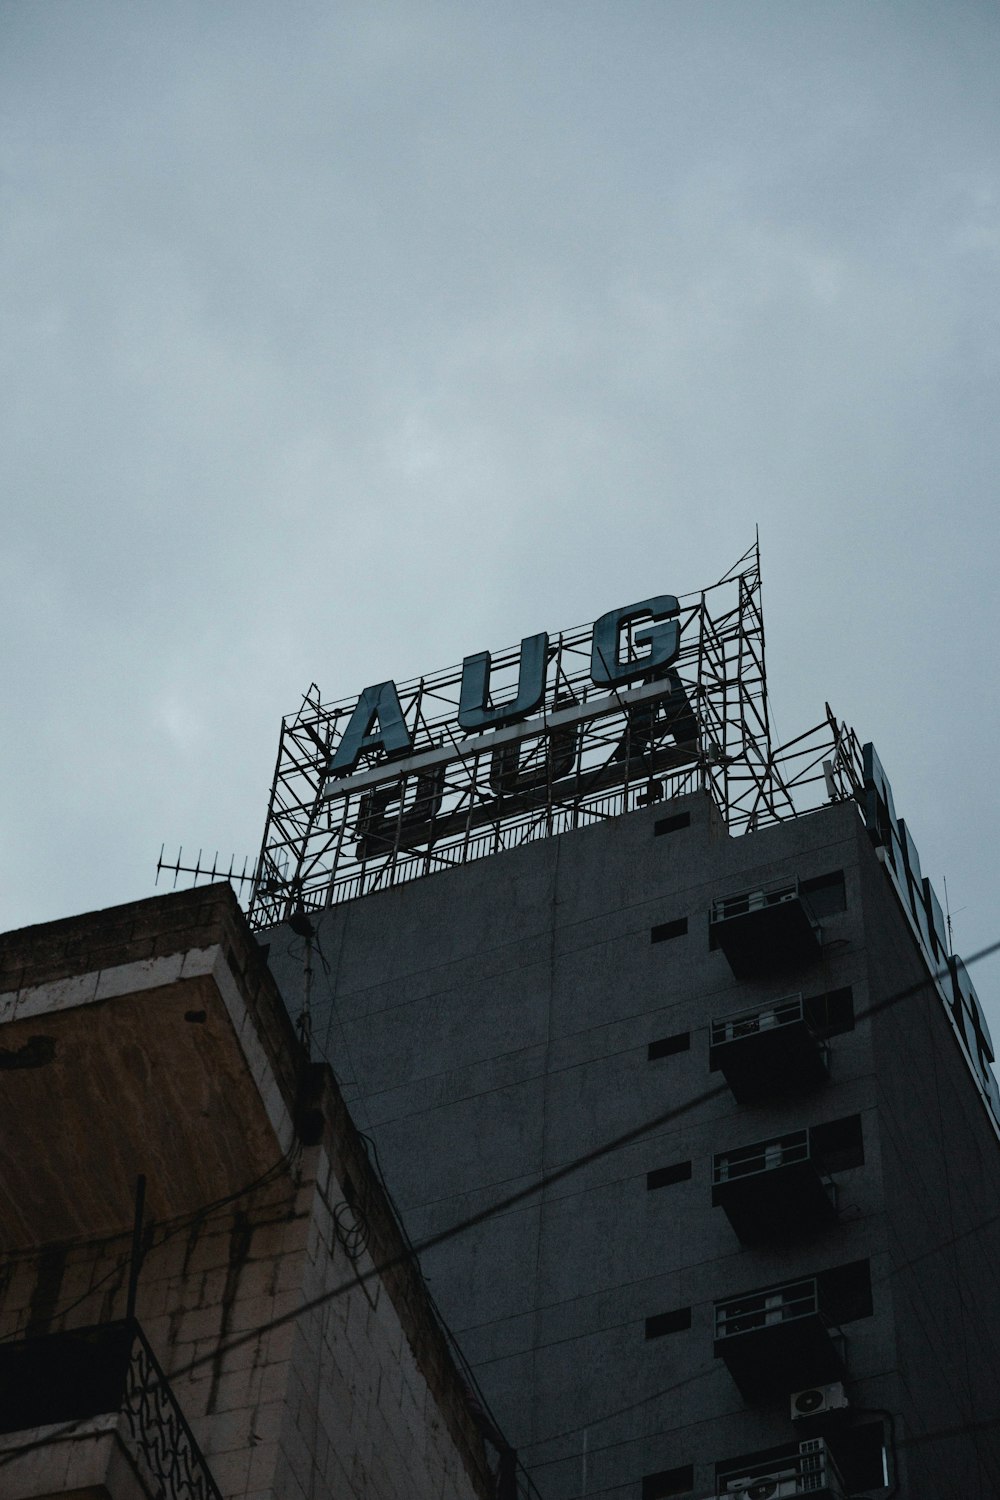 A.U.G. building during daytime